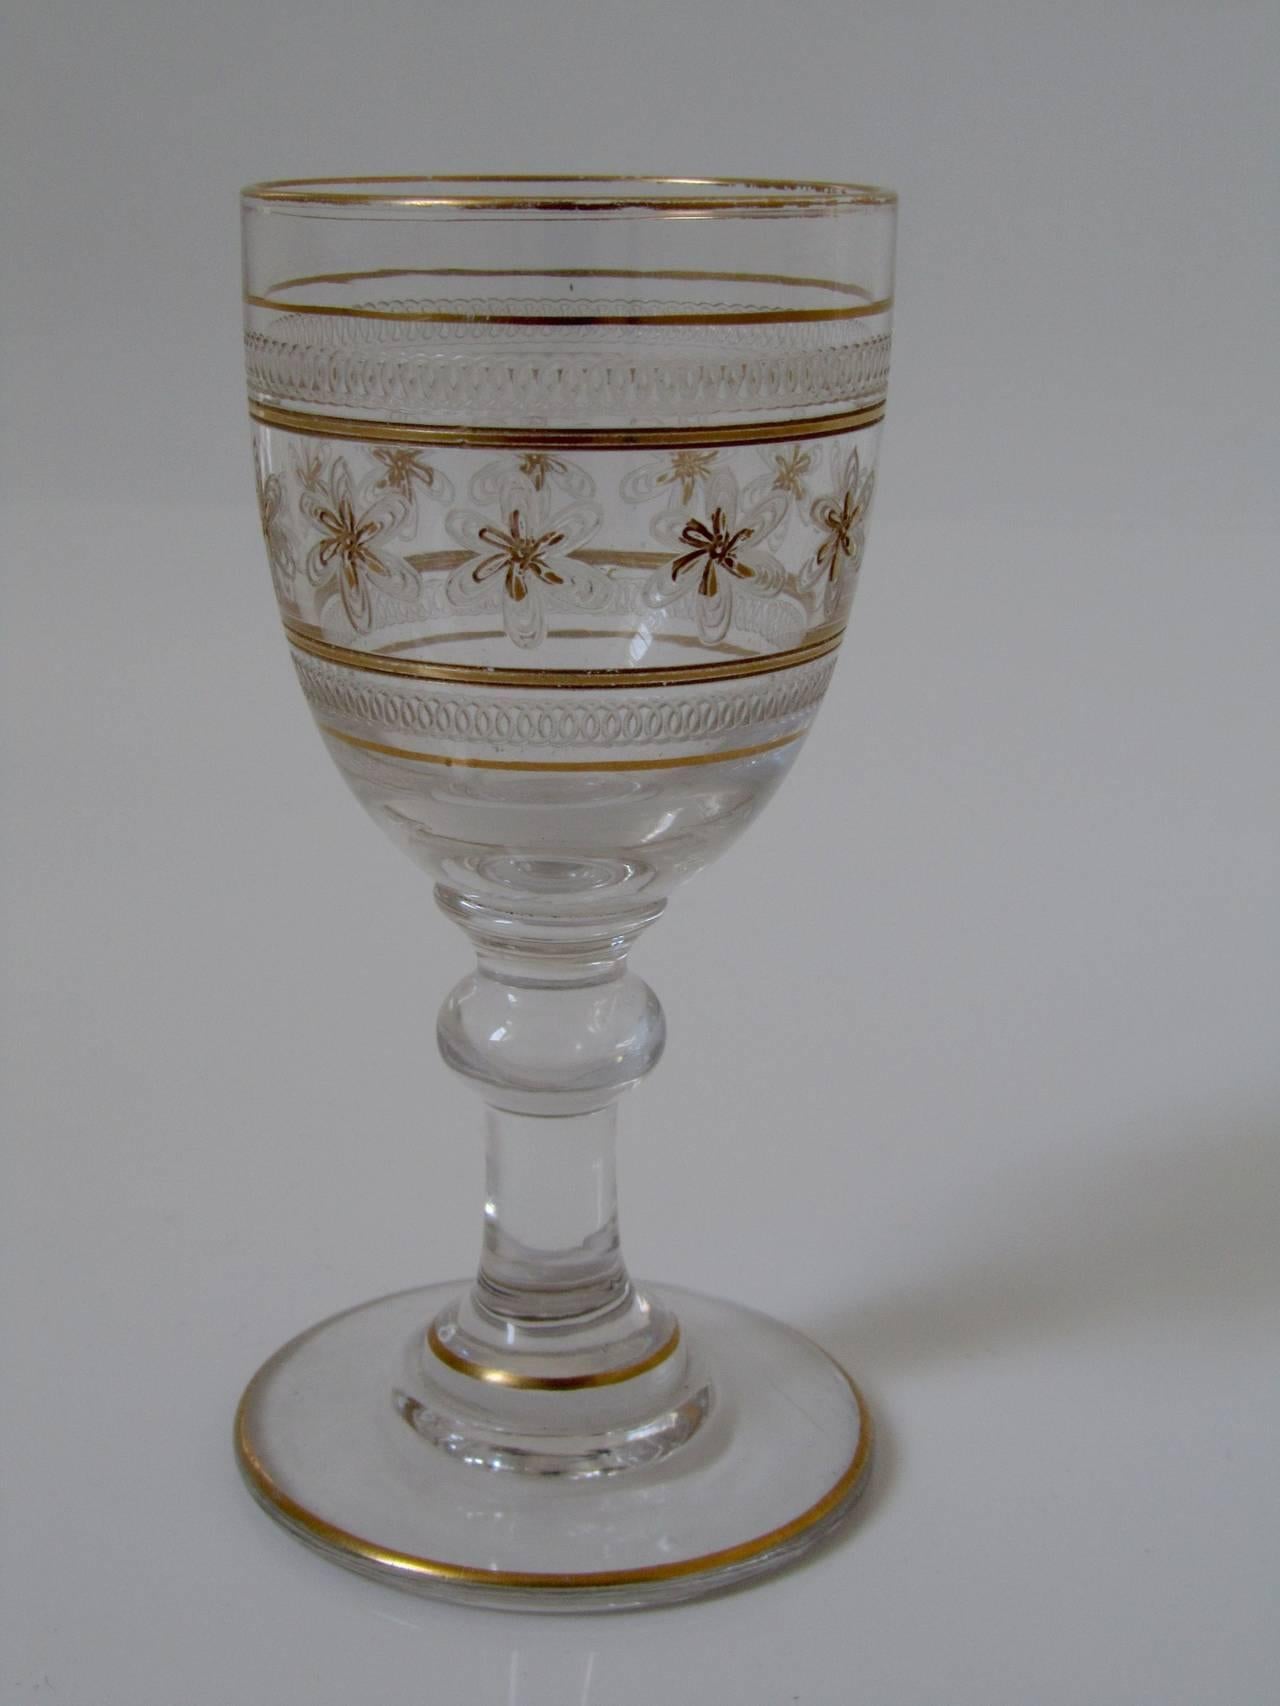 Early 20th Century Saint Louis Antique French Crystal Gilded Liquor or Aperitif Serving Set